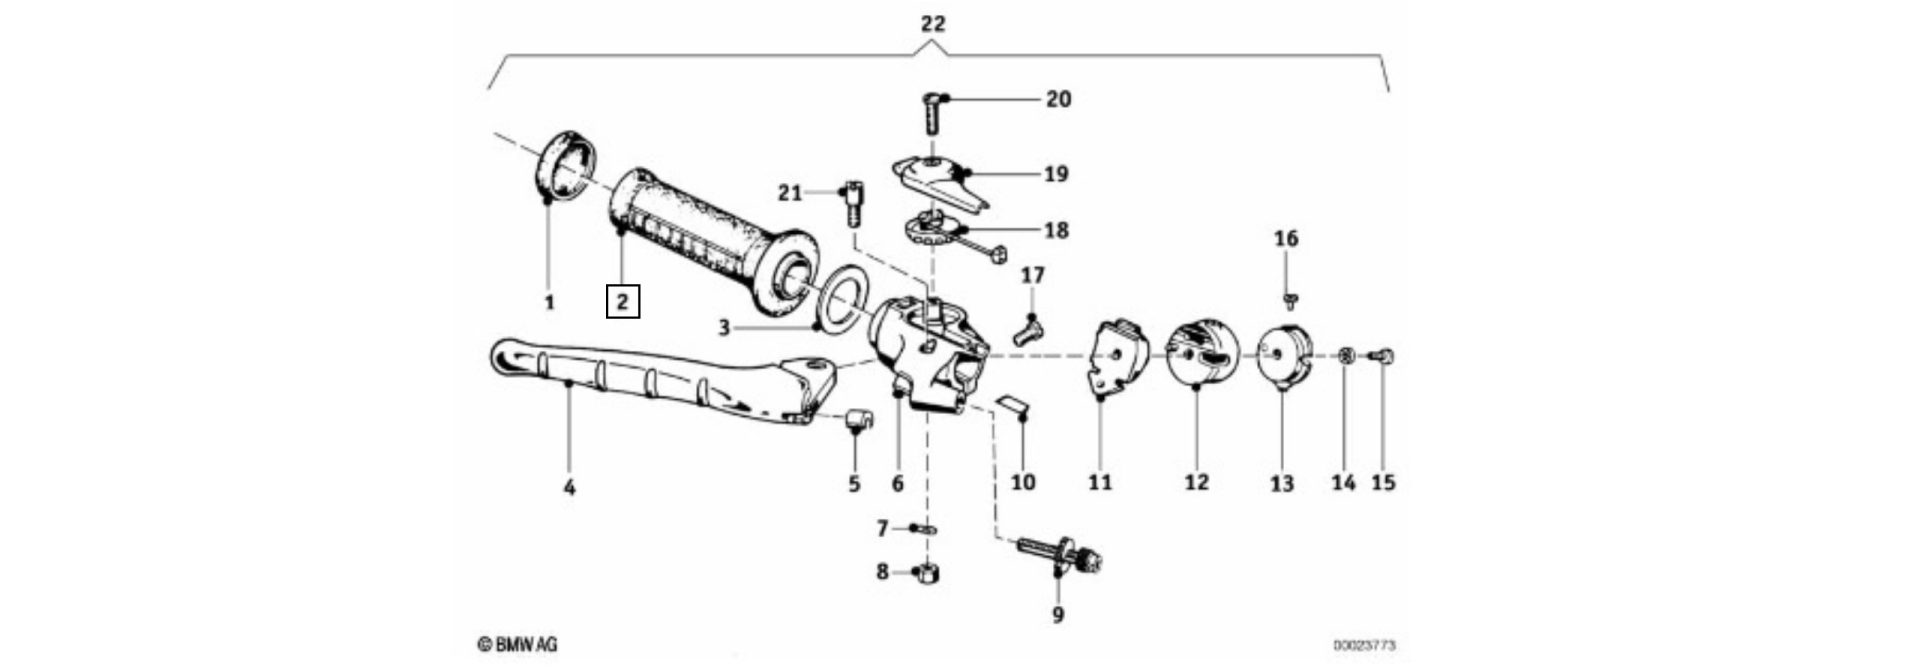 Exploded-view drawing handle right